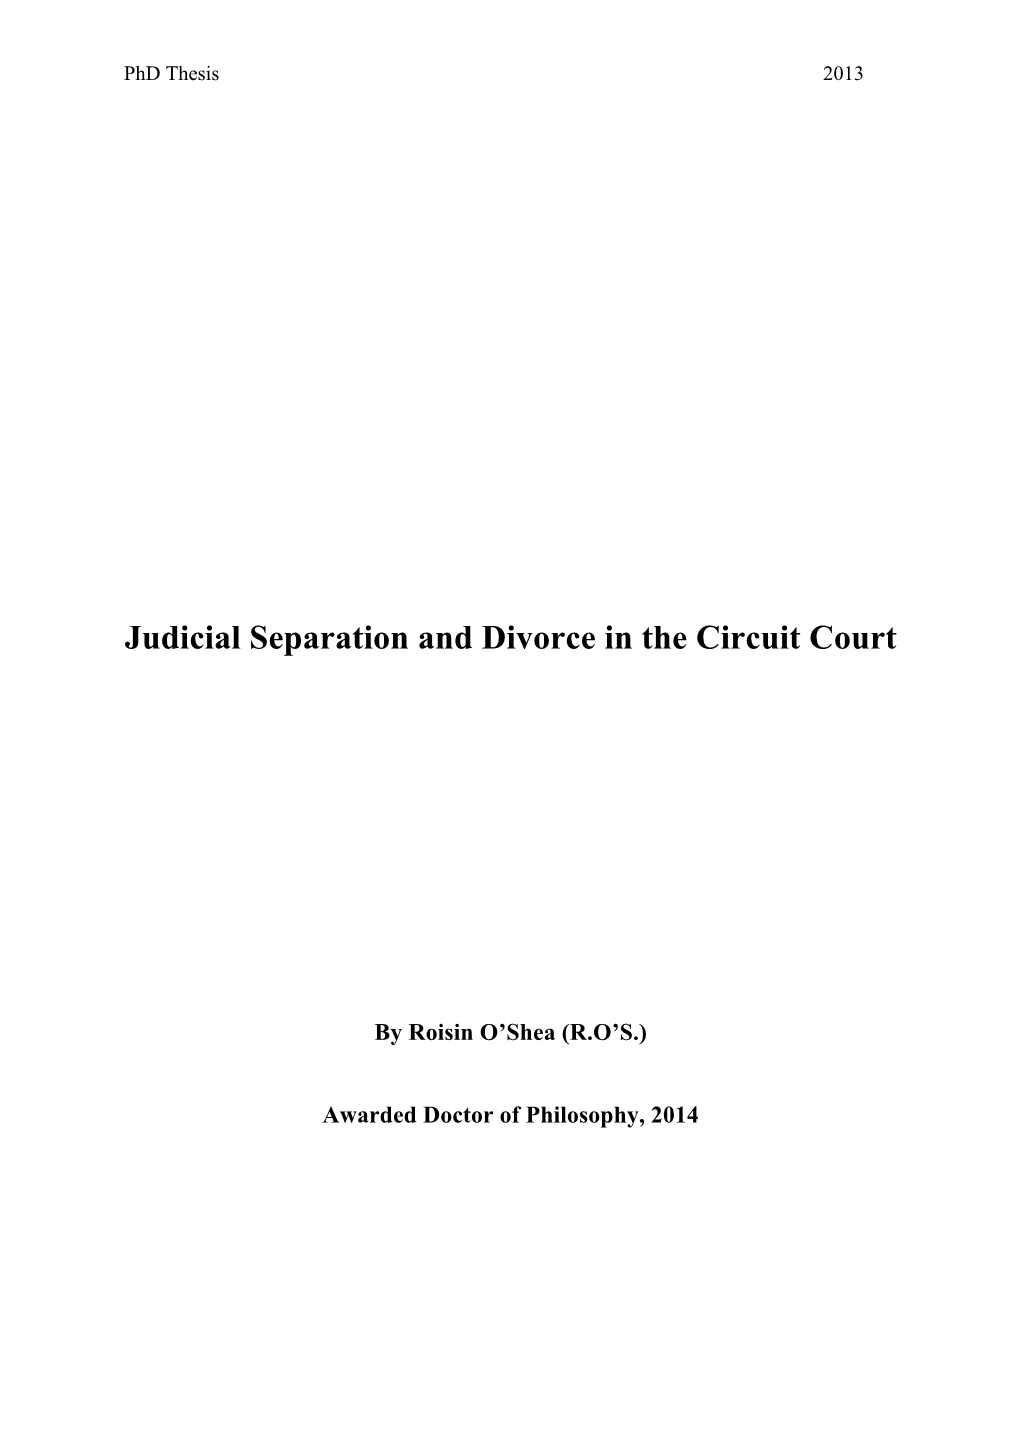 Judicial Separation and Divorce in the Circuit Court